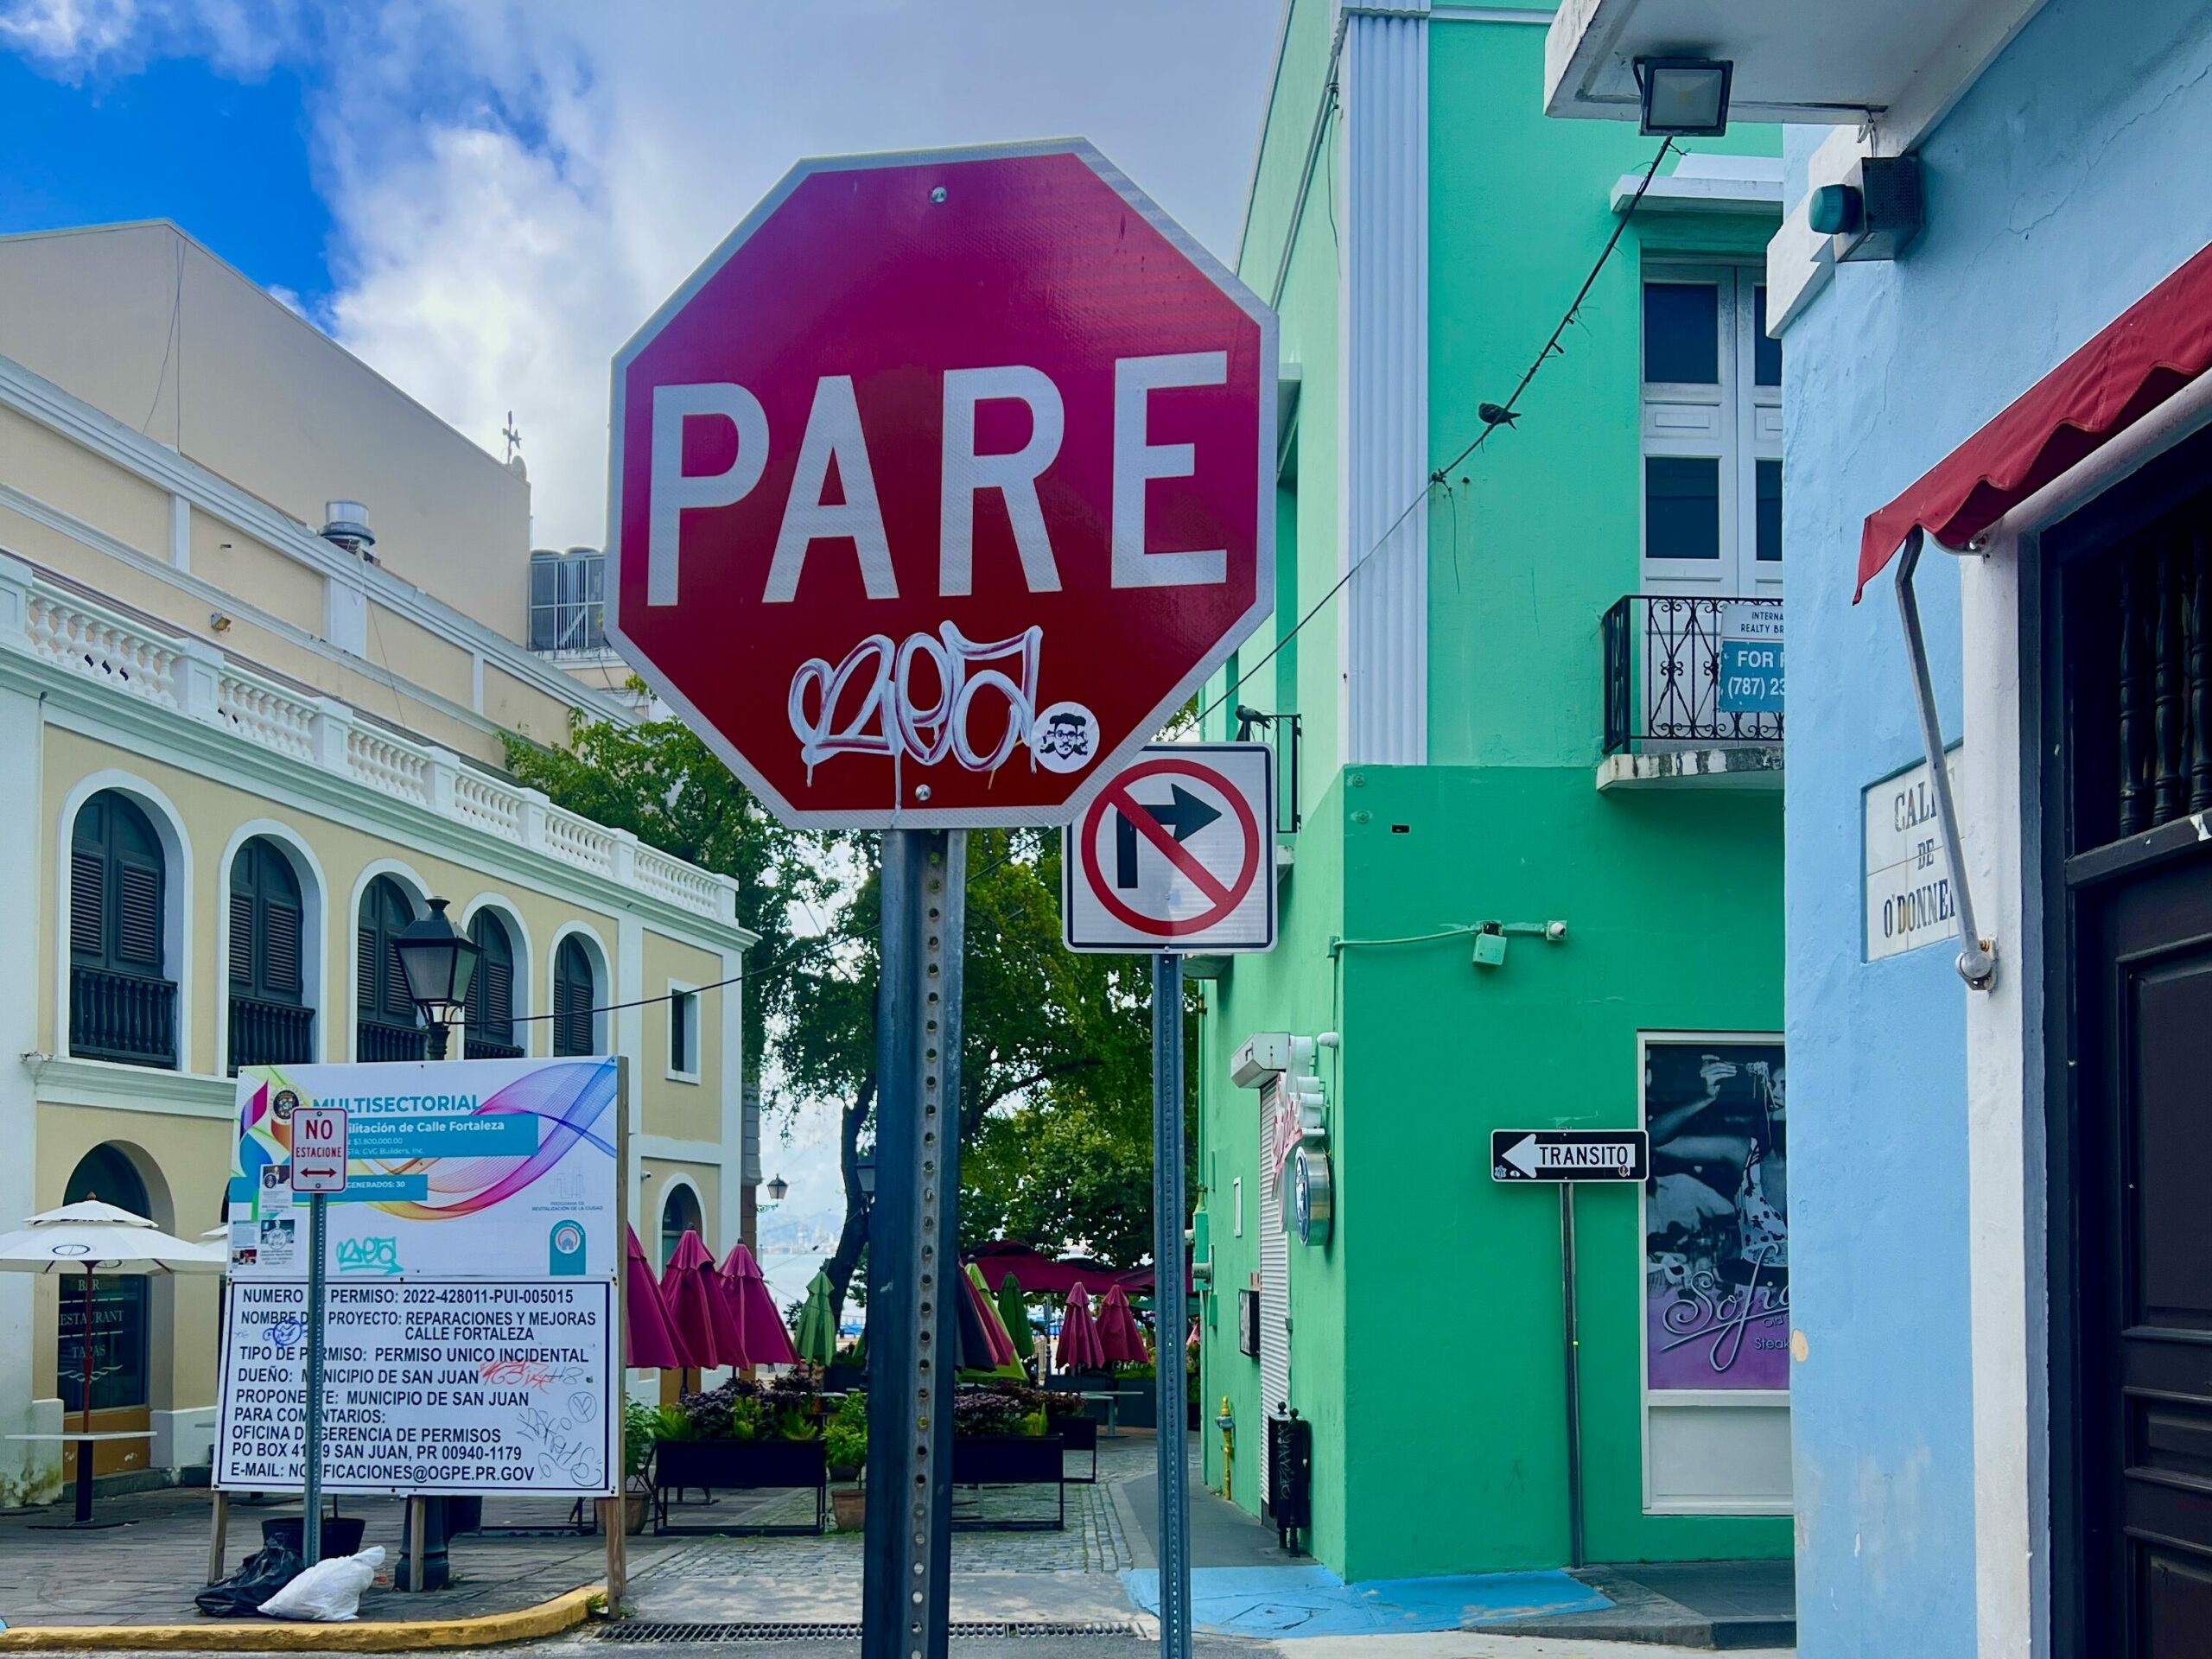 A stop sign in Puerto Rico  in Spanish 